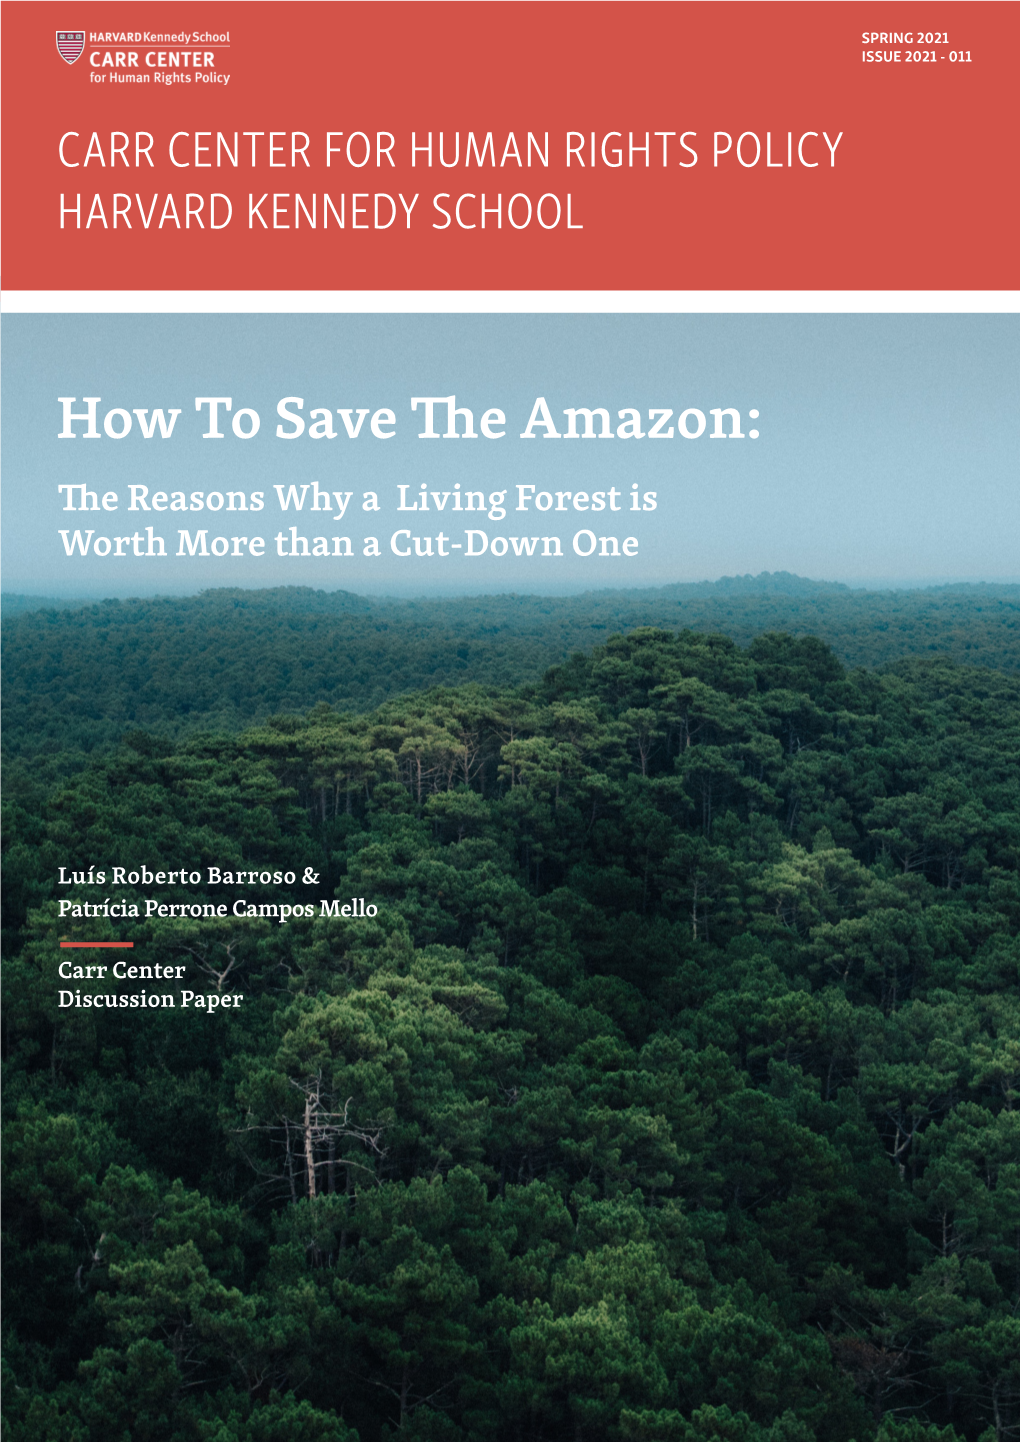 How to Save the Amazon: the Reasons Why a Living Forest Is Worth More Than a Cut-Down One